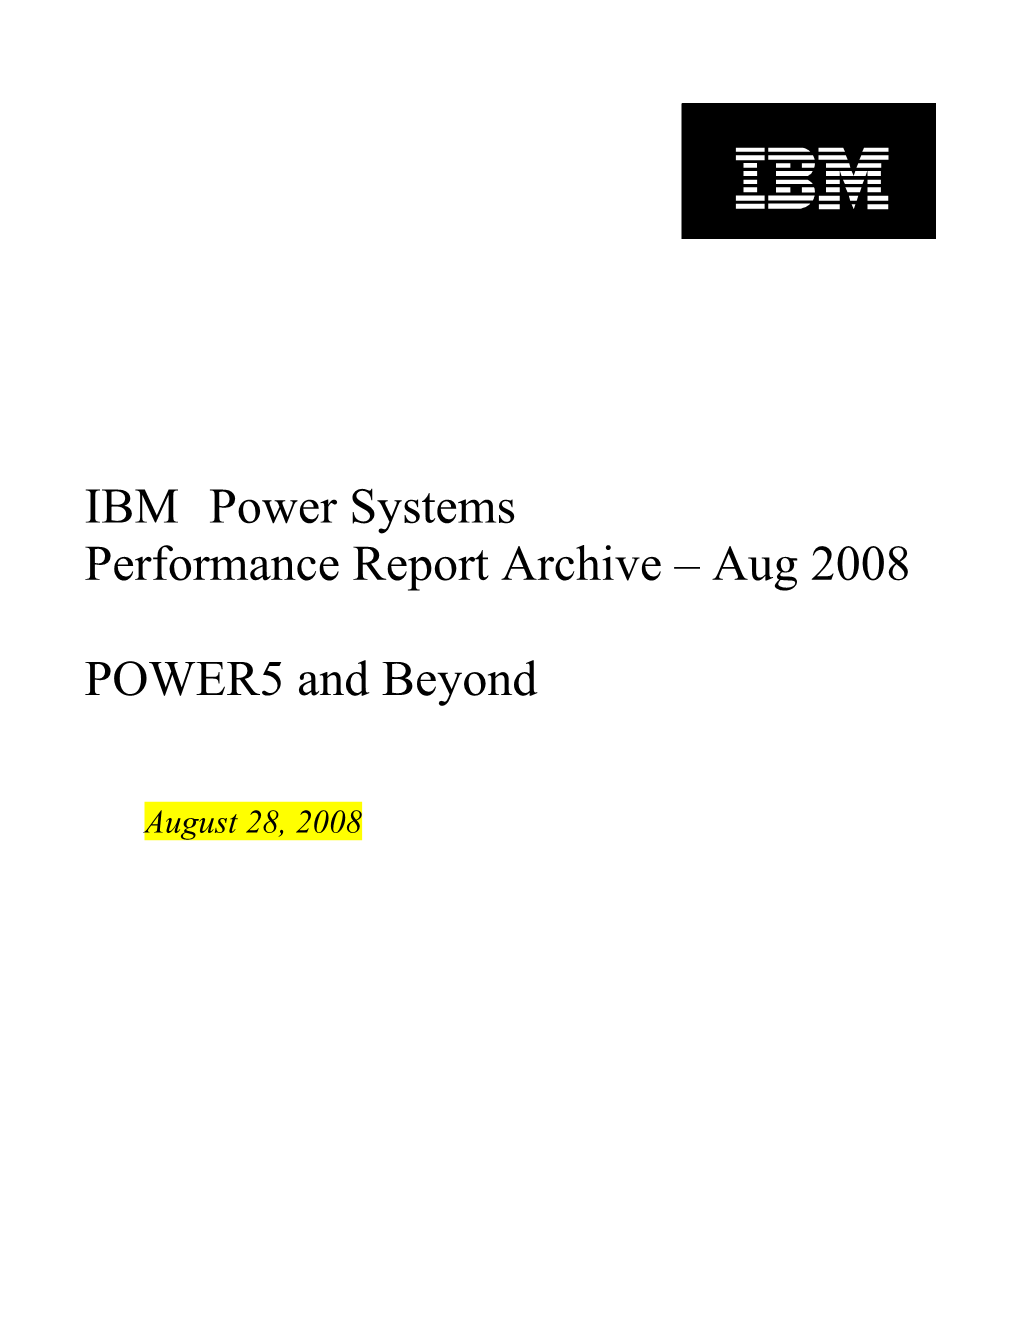 IBM Power Systems Performance Report Archive – Aug 2008